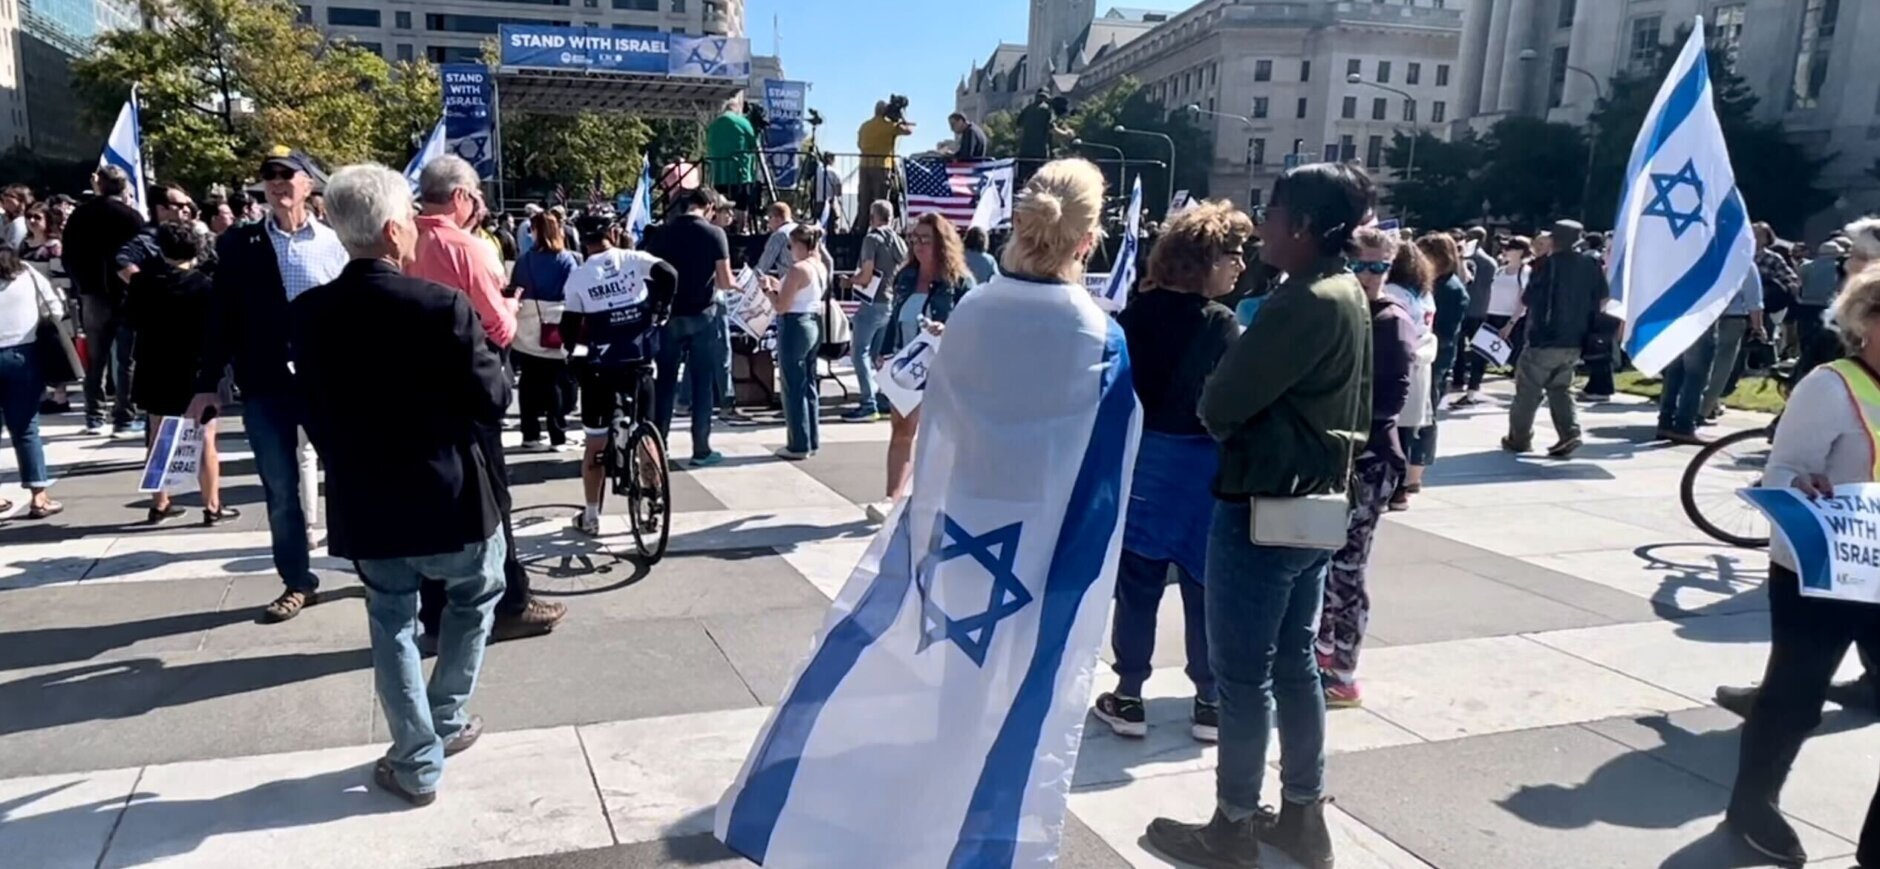 Fury, sadness and solidarity at ‘Stand with Israel’ rally in DC - WTOP News